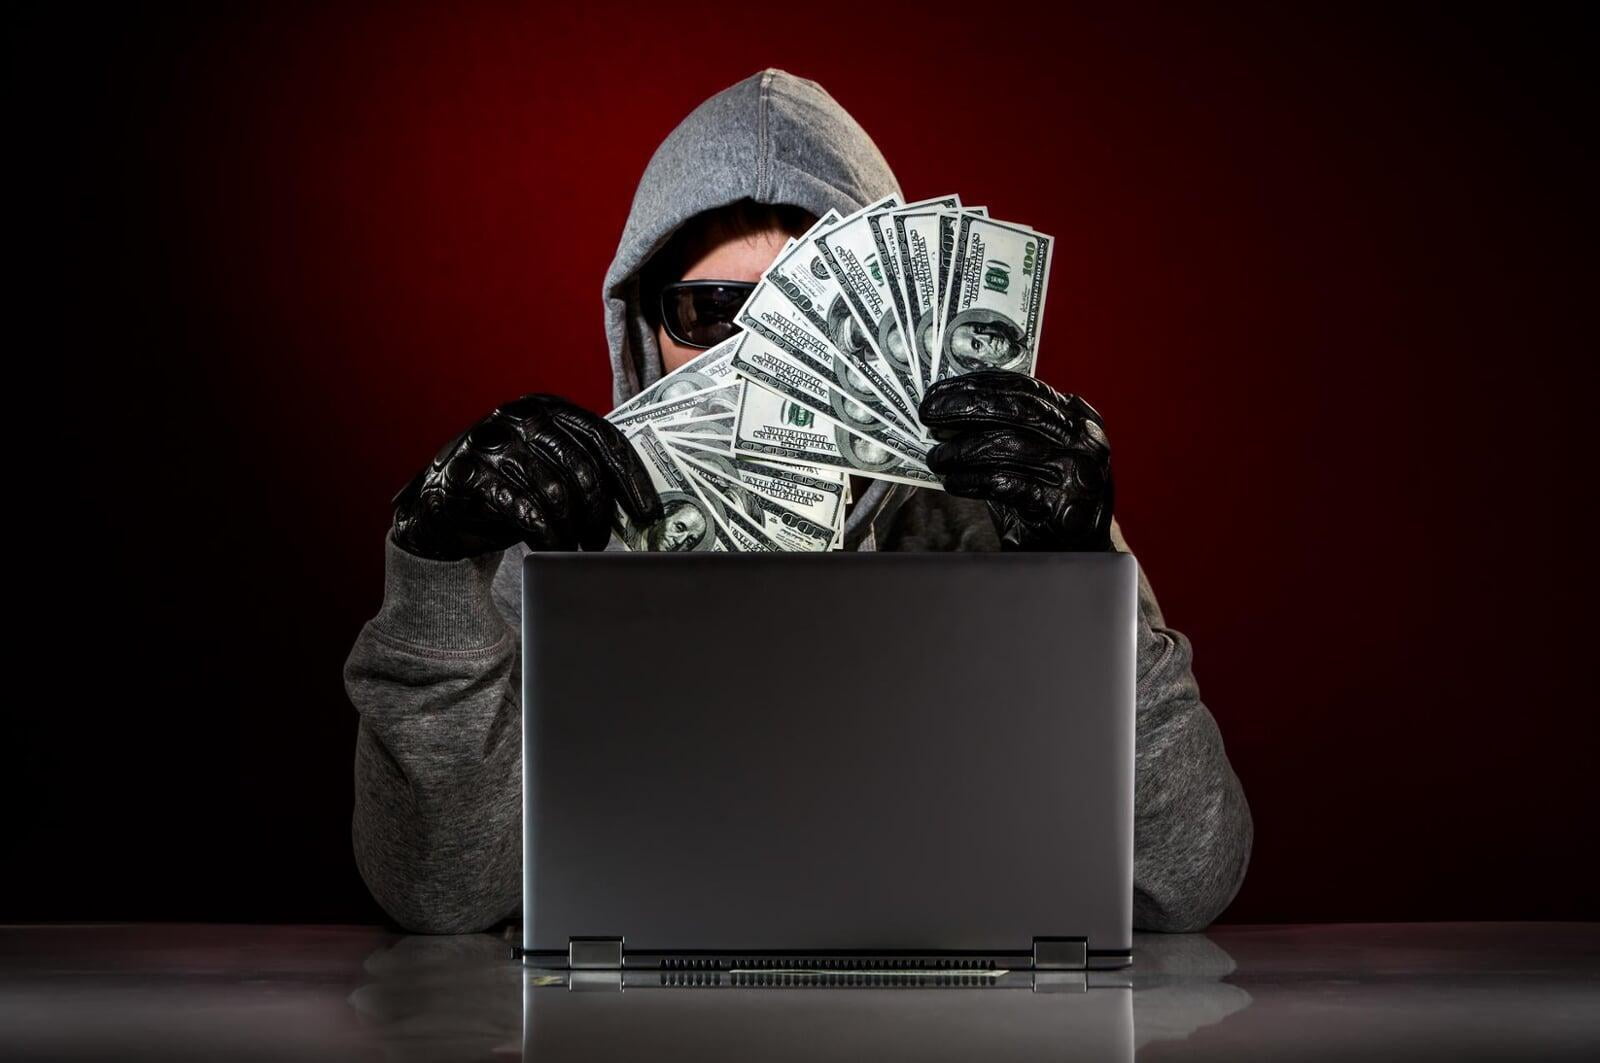 The Ransomware Scare - practical tips to protect yourself